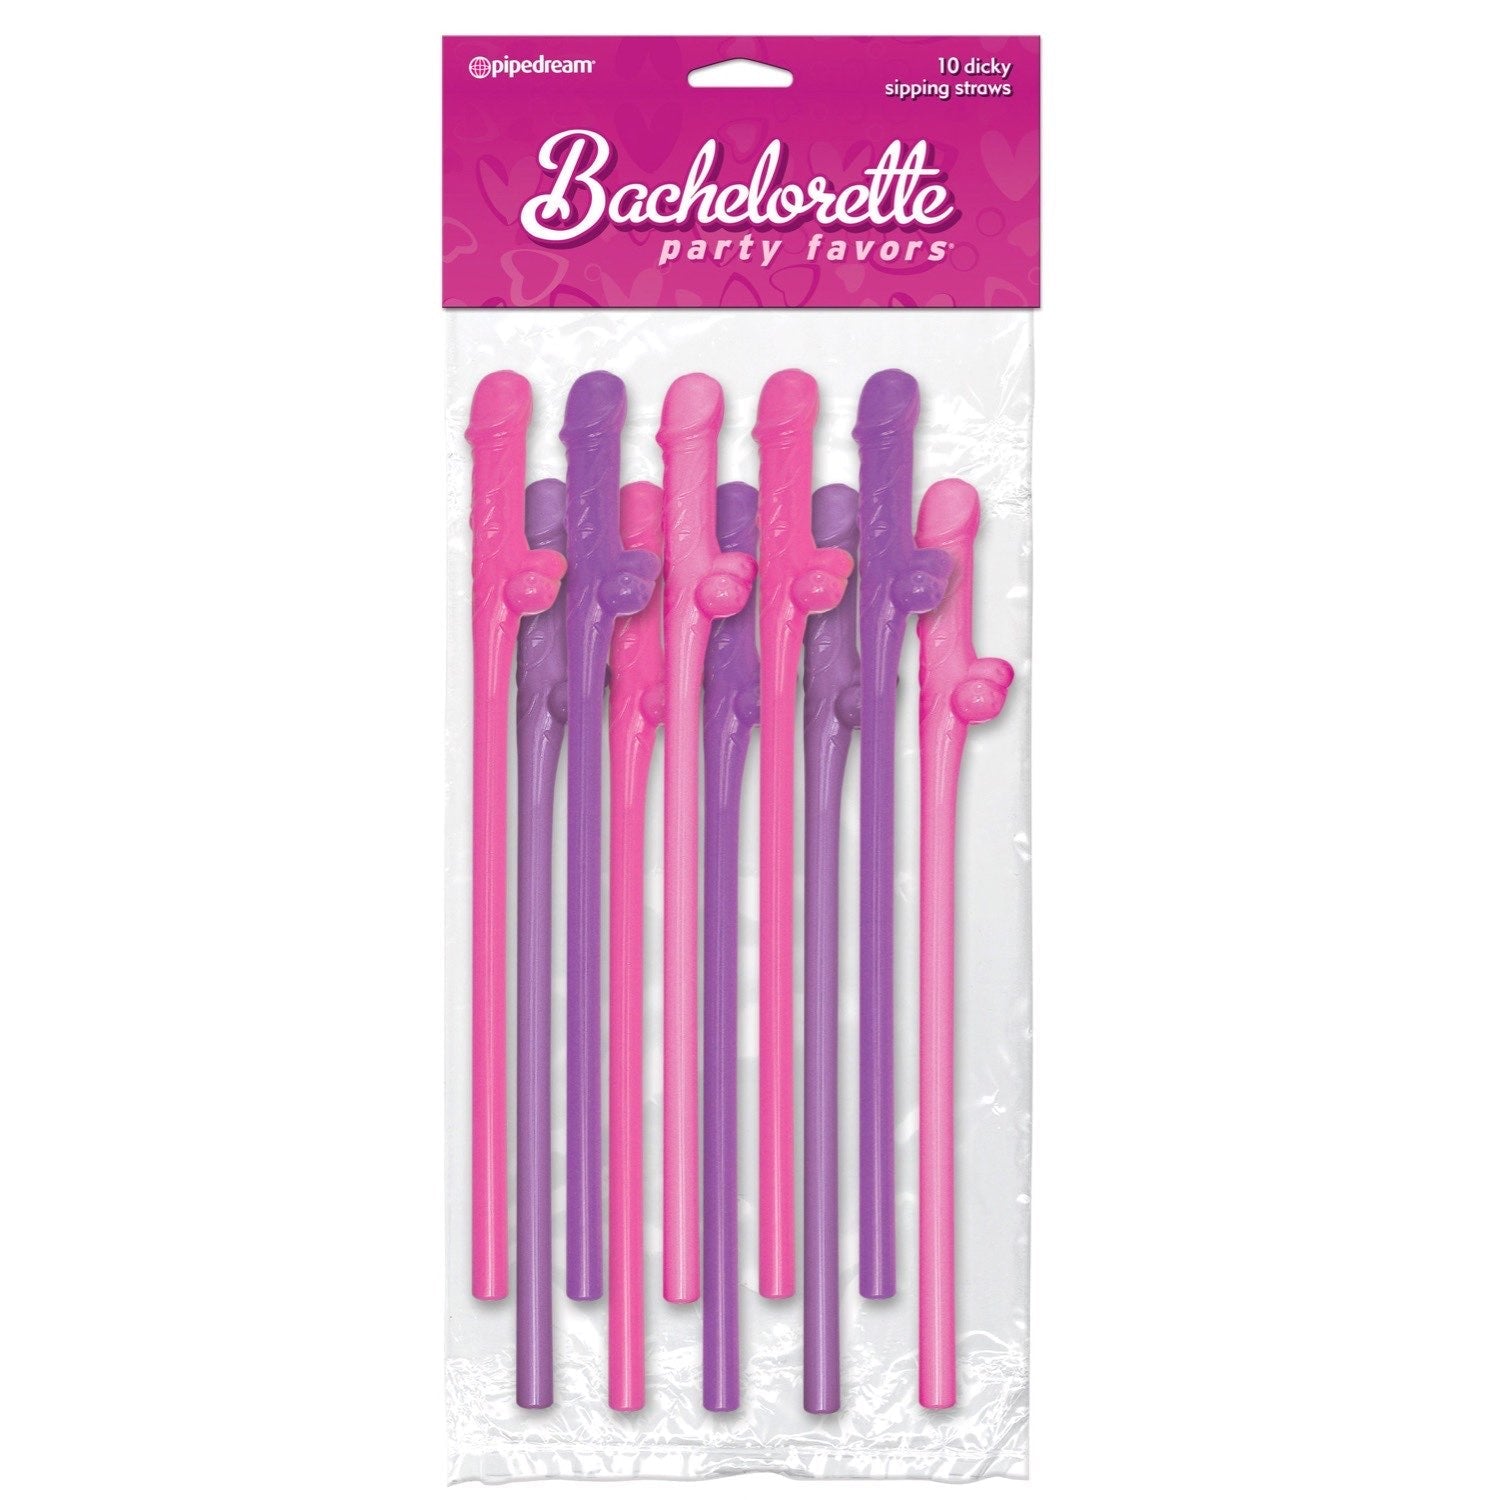 Bachelorette Party Favors Dicky Sipping Straws - Coloured Straws - Set of 10 by Pipedream